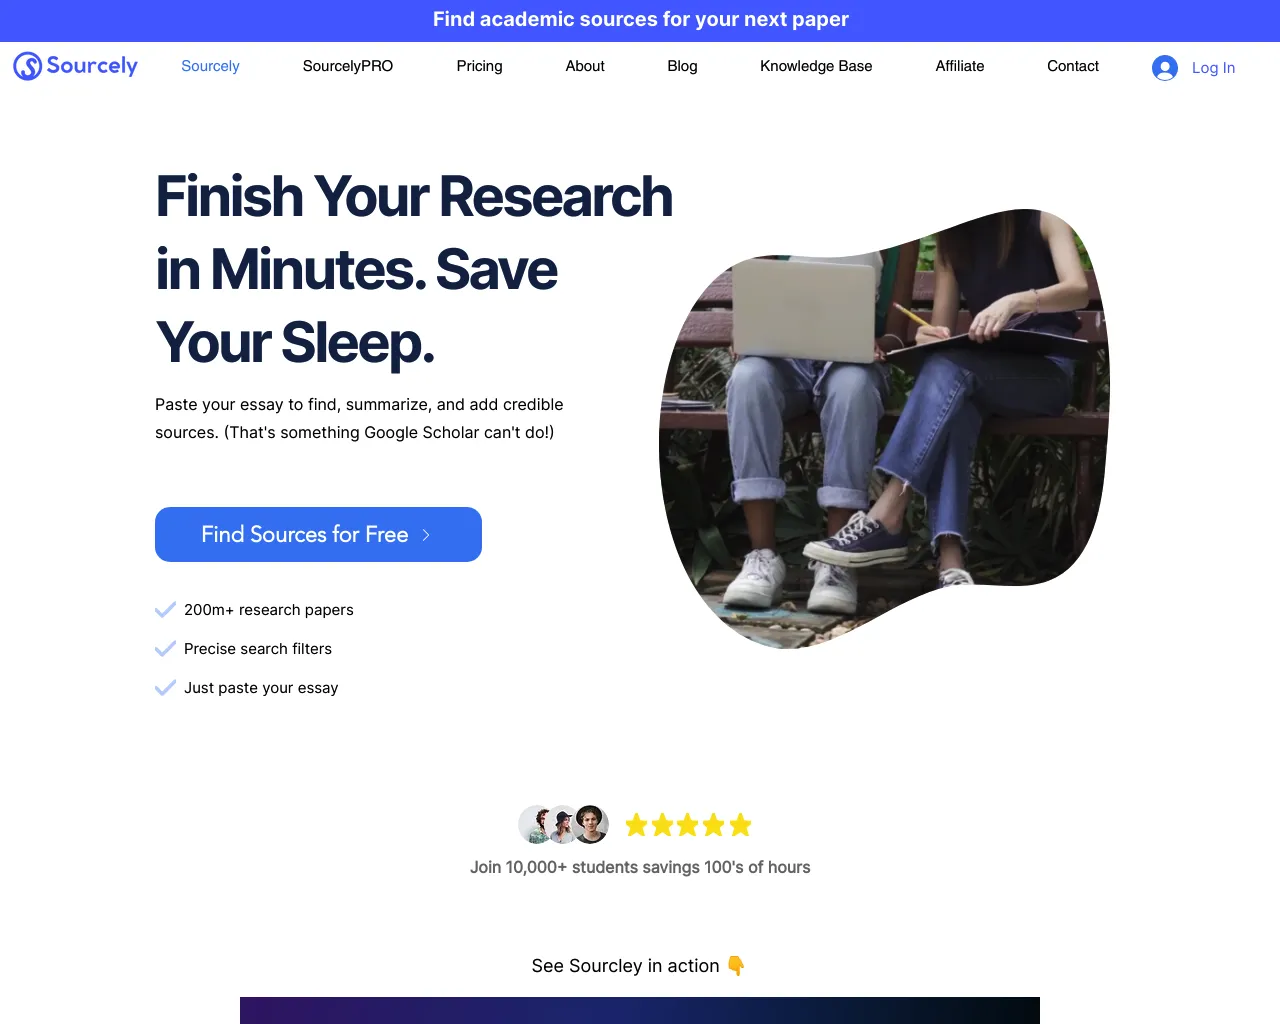 Sourcely- Finish Your Research in Minutes. Save Your Sleep